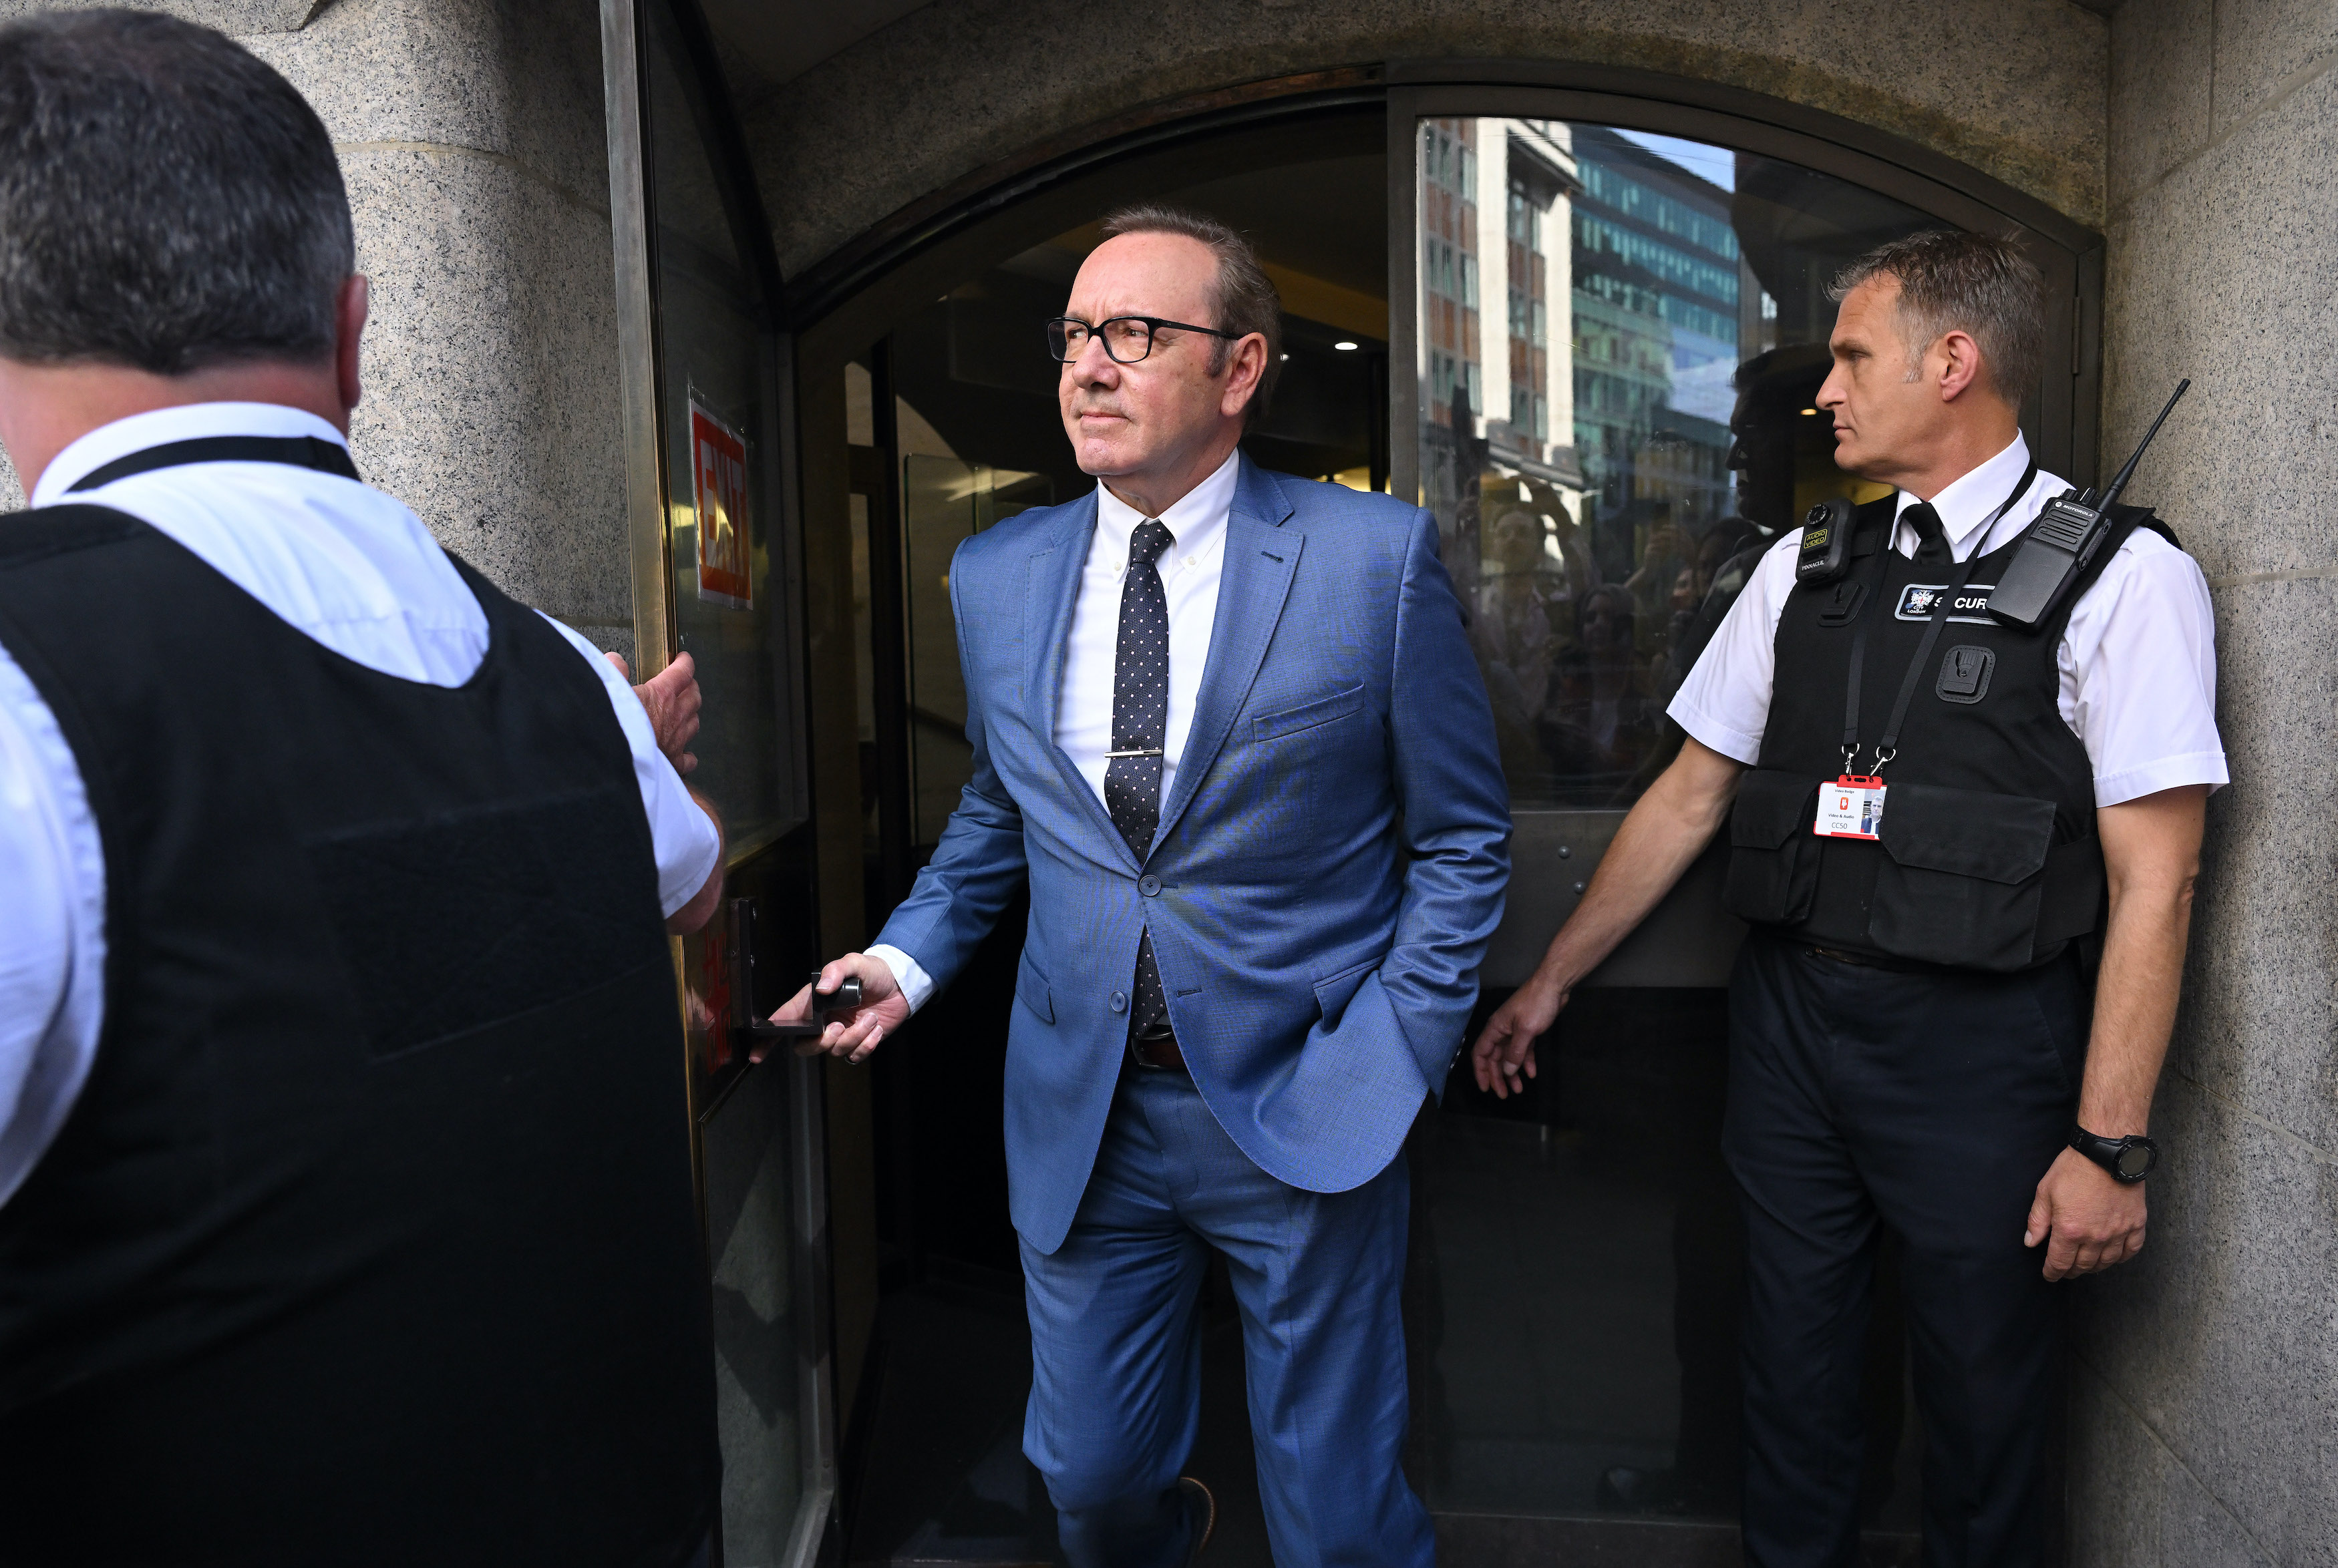 Movie actor Kevin Spacey leaves the Old Bailey Central Criminal Court in London after pleading not guilty to sexual assault charges